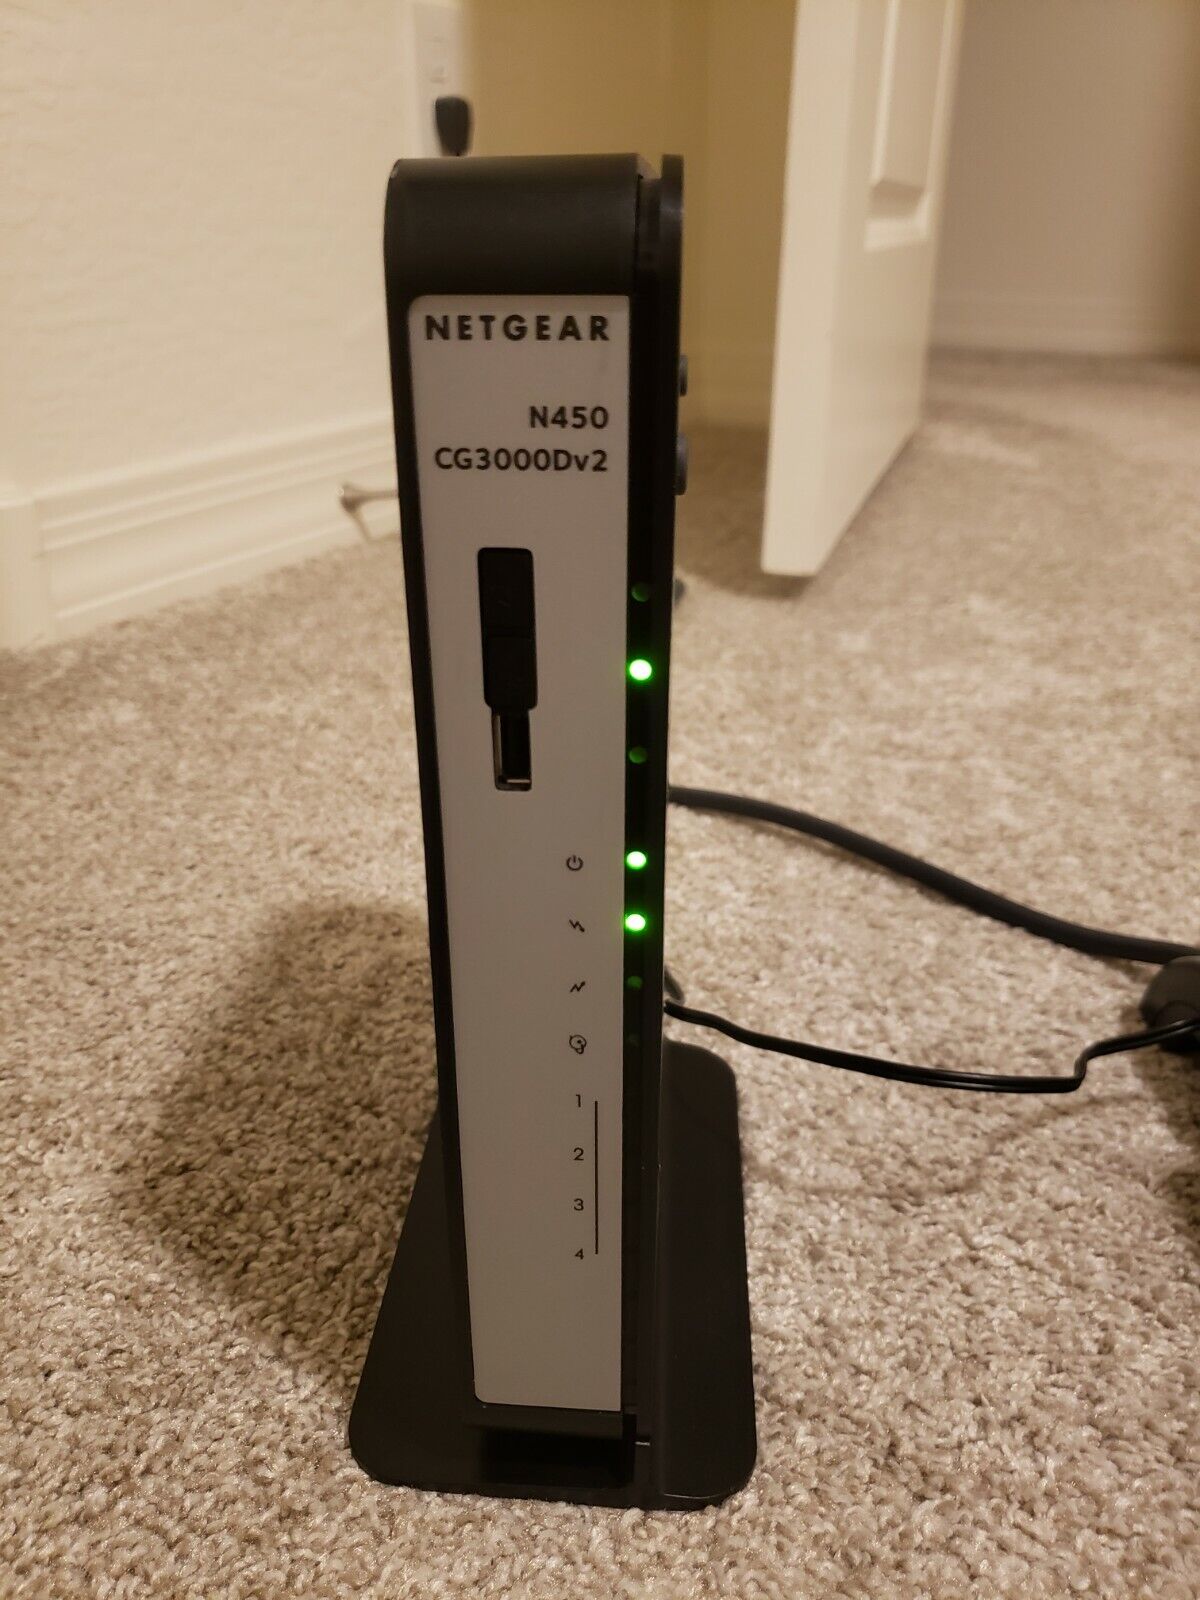 Netgear CG3000Dv2 N450 Docsis 3.0 Cable Modem and Wireless Router